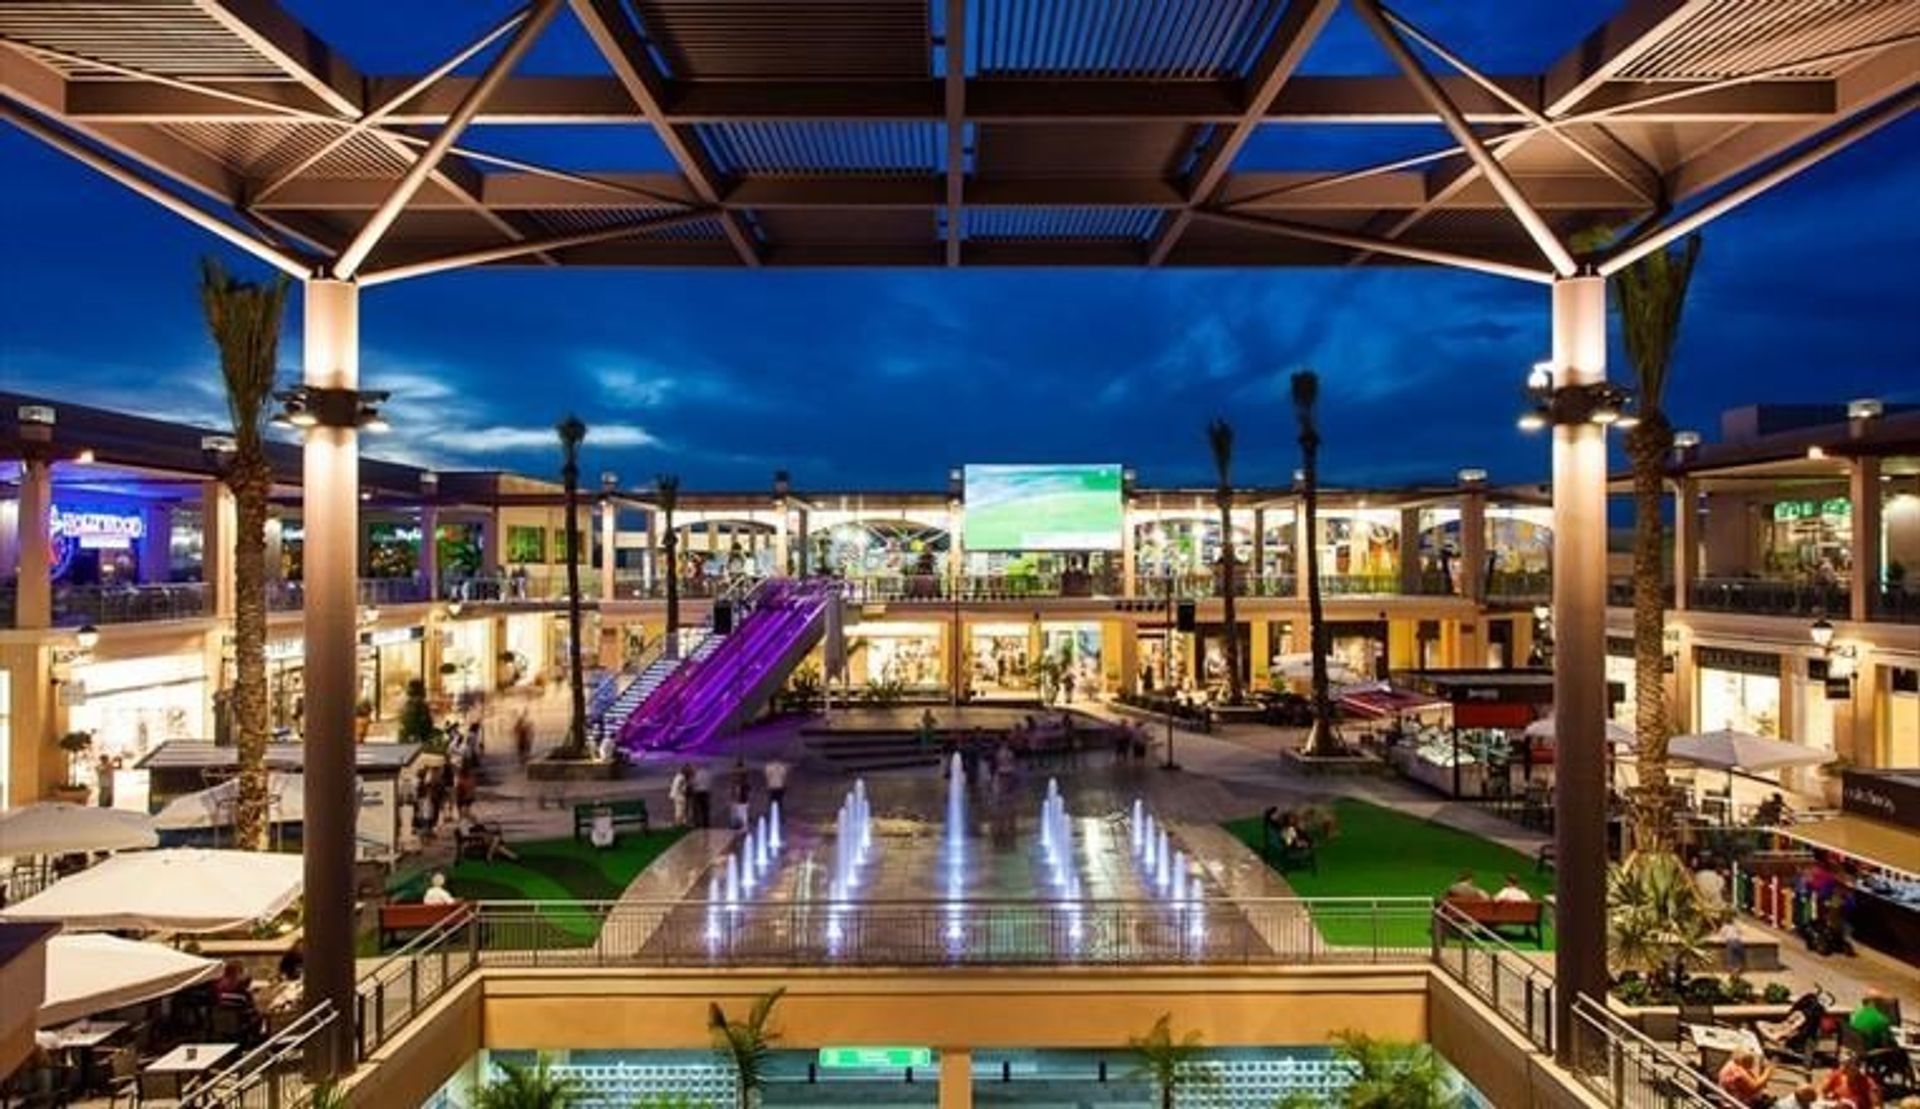 The largest shopping mall in the province, Zenia Boulevard offers upscale shops and fun activities for the little ones